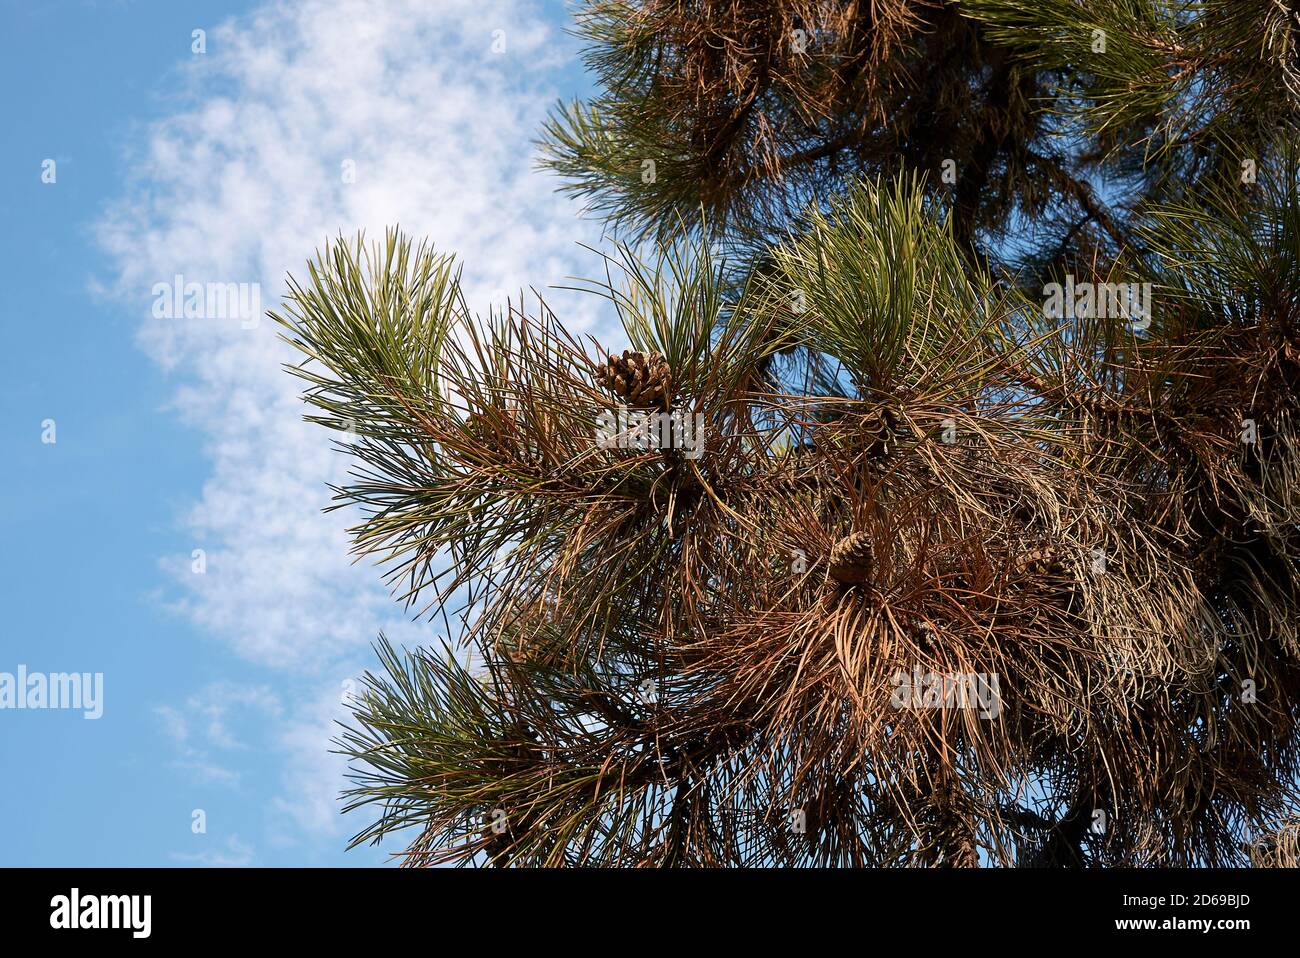 Pinus nigra J.F. Arnold branch and trunk close up Stock Photo